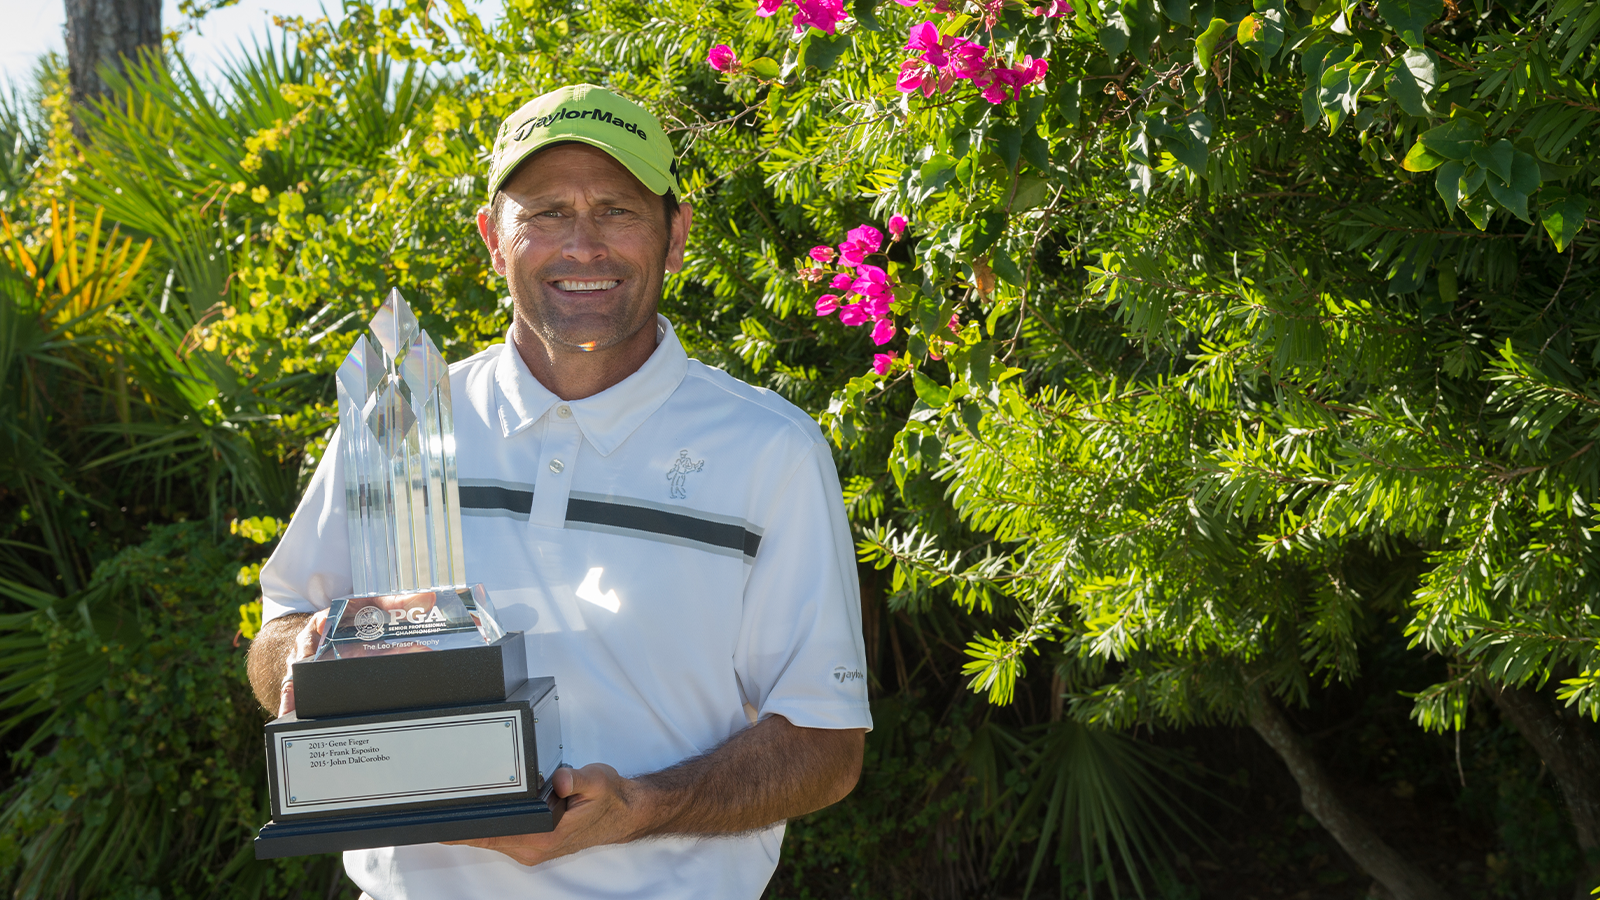 Champion Steve Schneiter poses with the Leo Fraser Trophy after the awards ceremony for the Senior PGA Professional Championship held at PGA Golf Club on November 20, 2016 in Port St. Lucie, Florida. (Photo by Montana Pritchard/PGA of America)